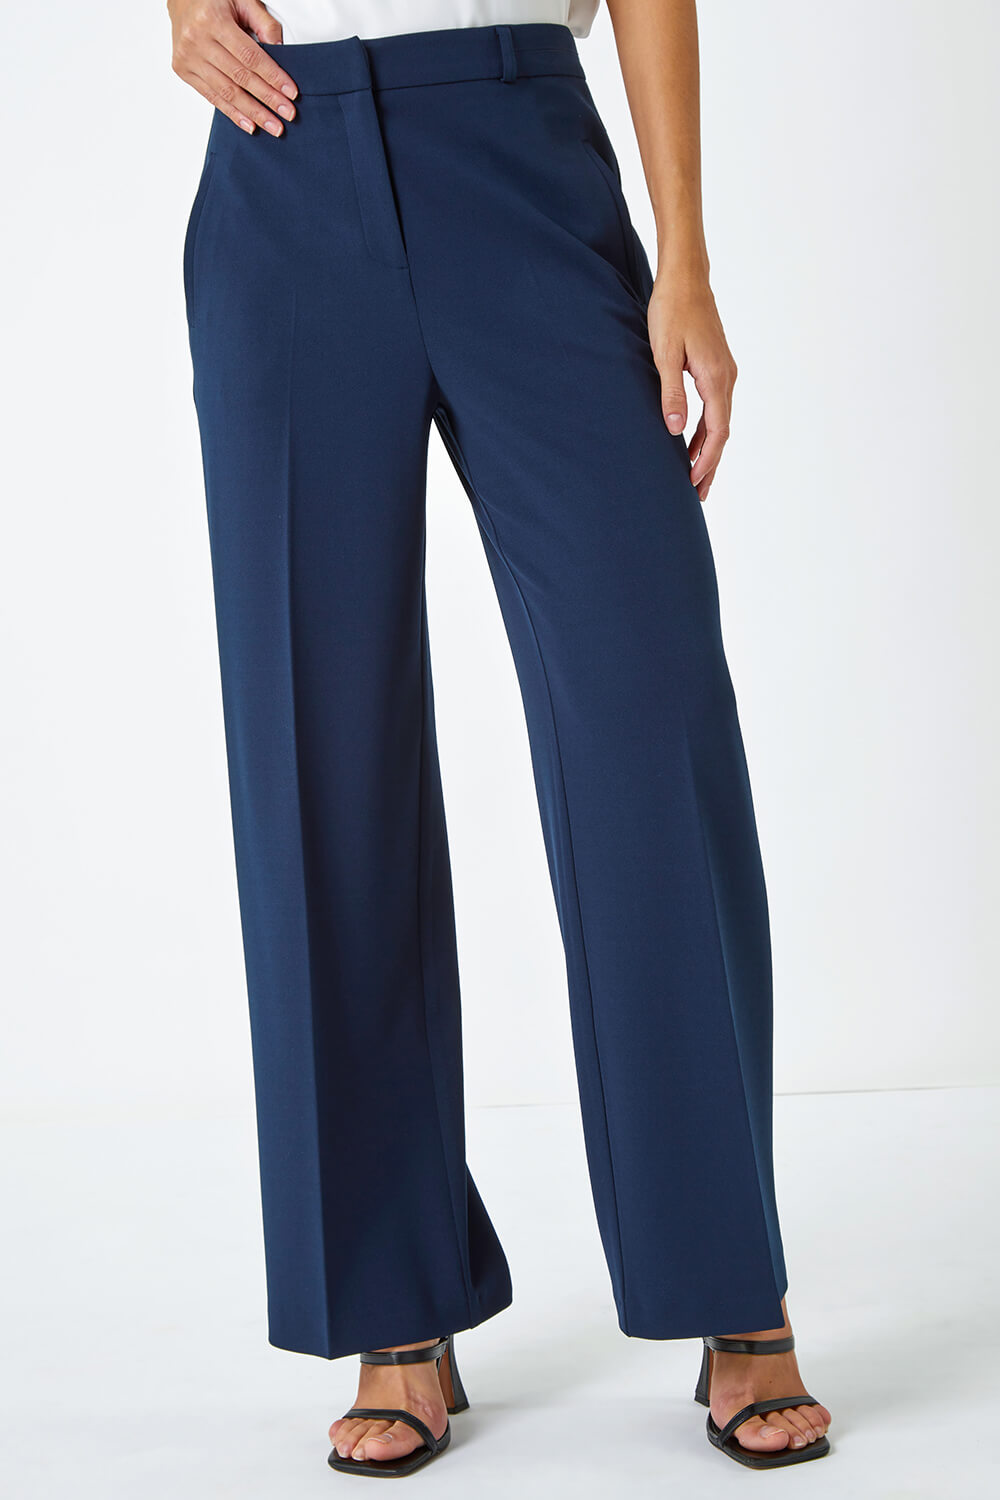 Navy  Wide Leg Premium Stretch Trousers, Image 3 of 5